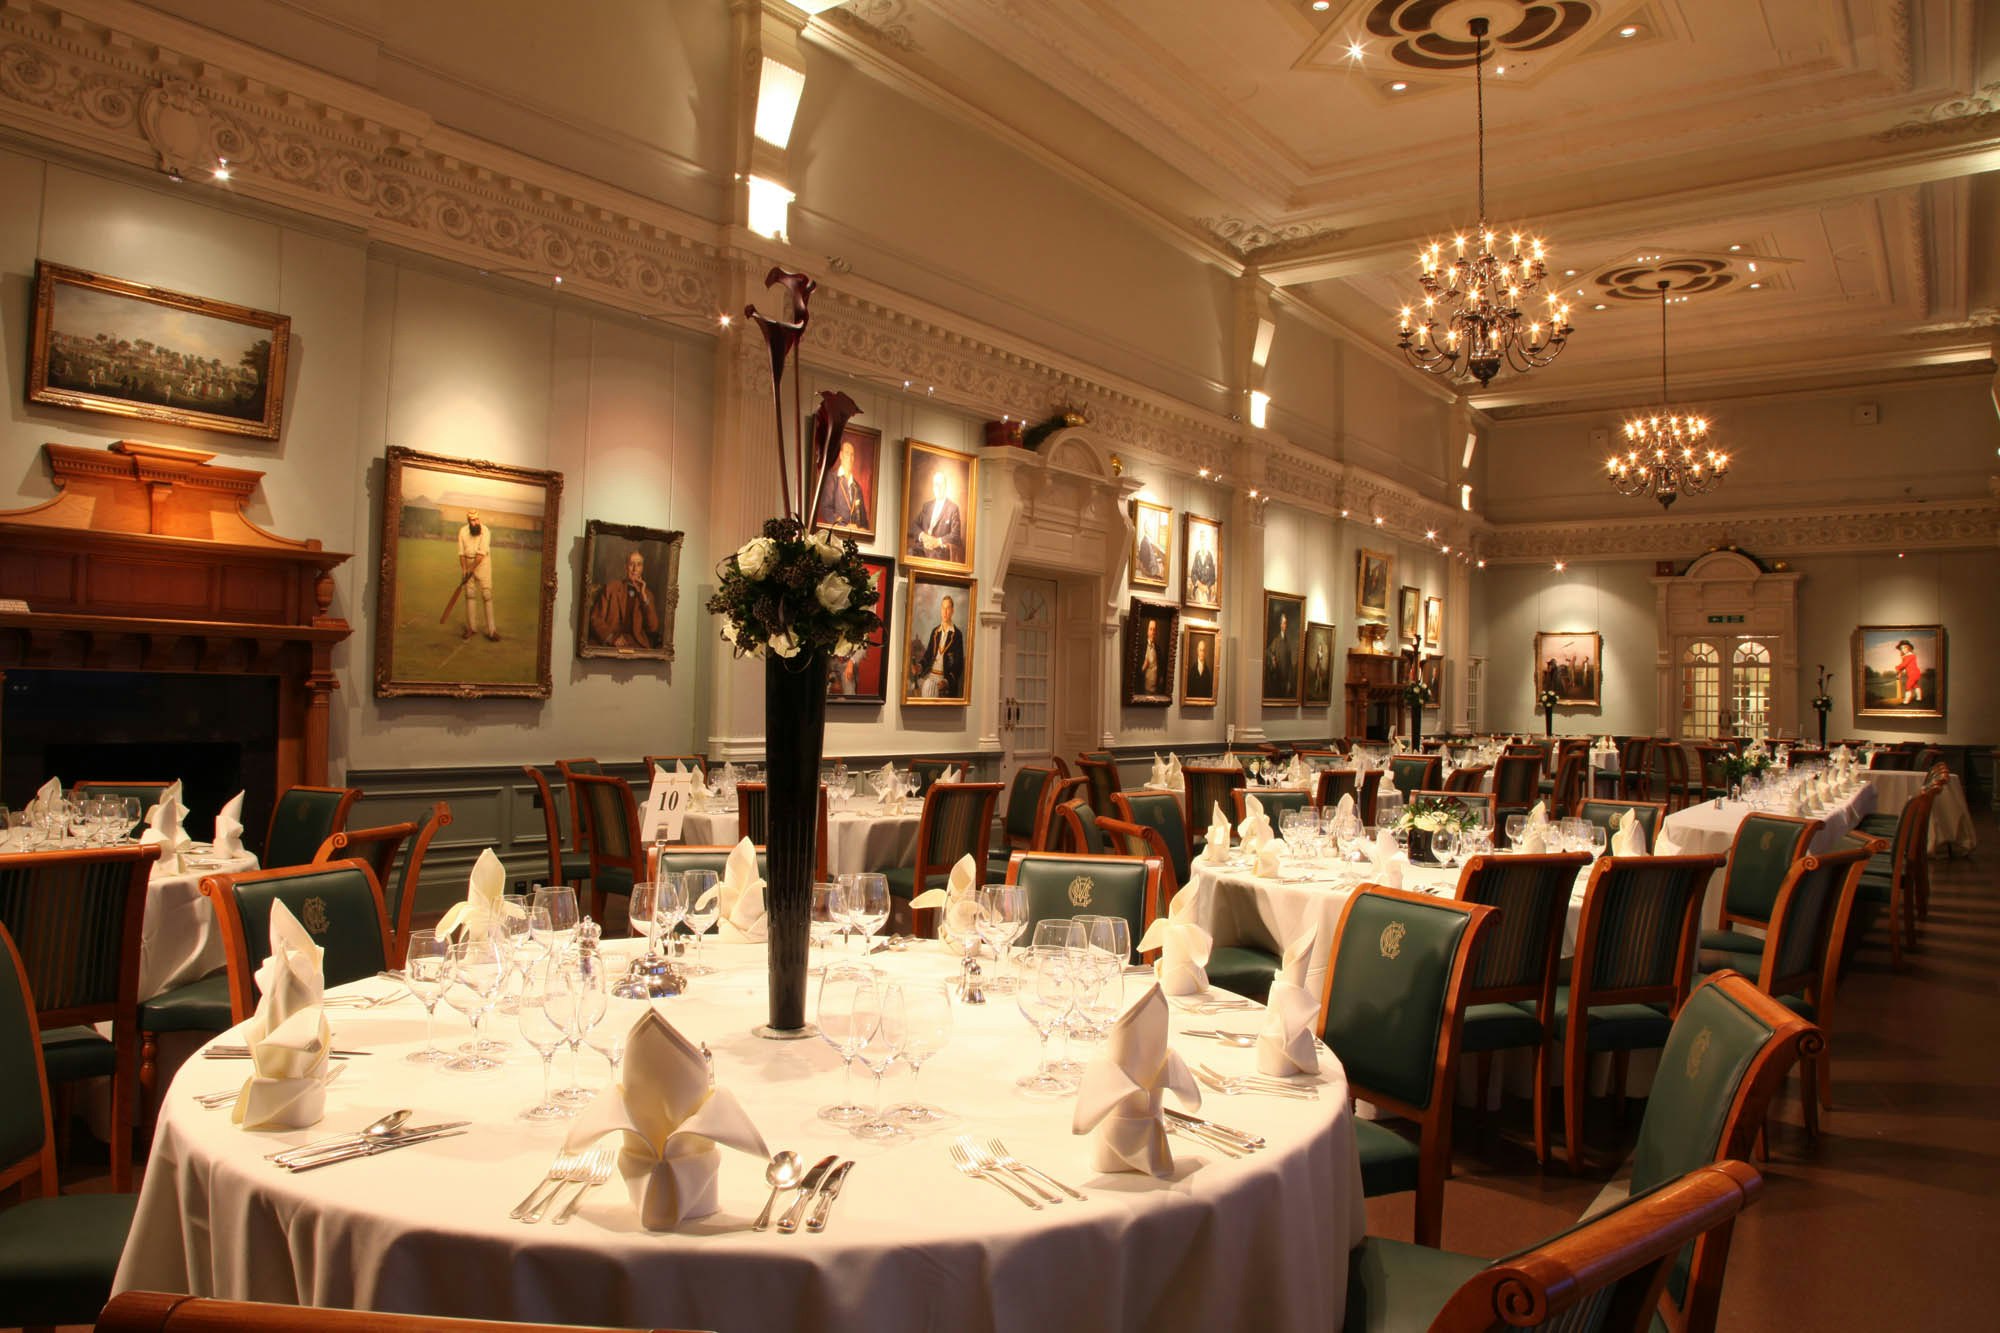 The Long Room at Lord's Cricket Ground